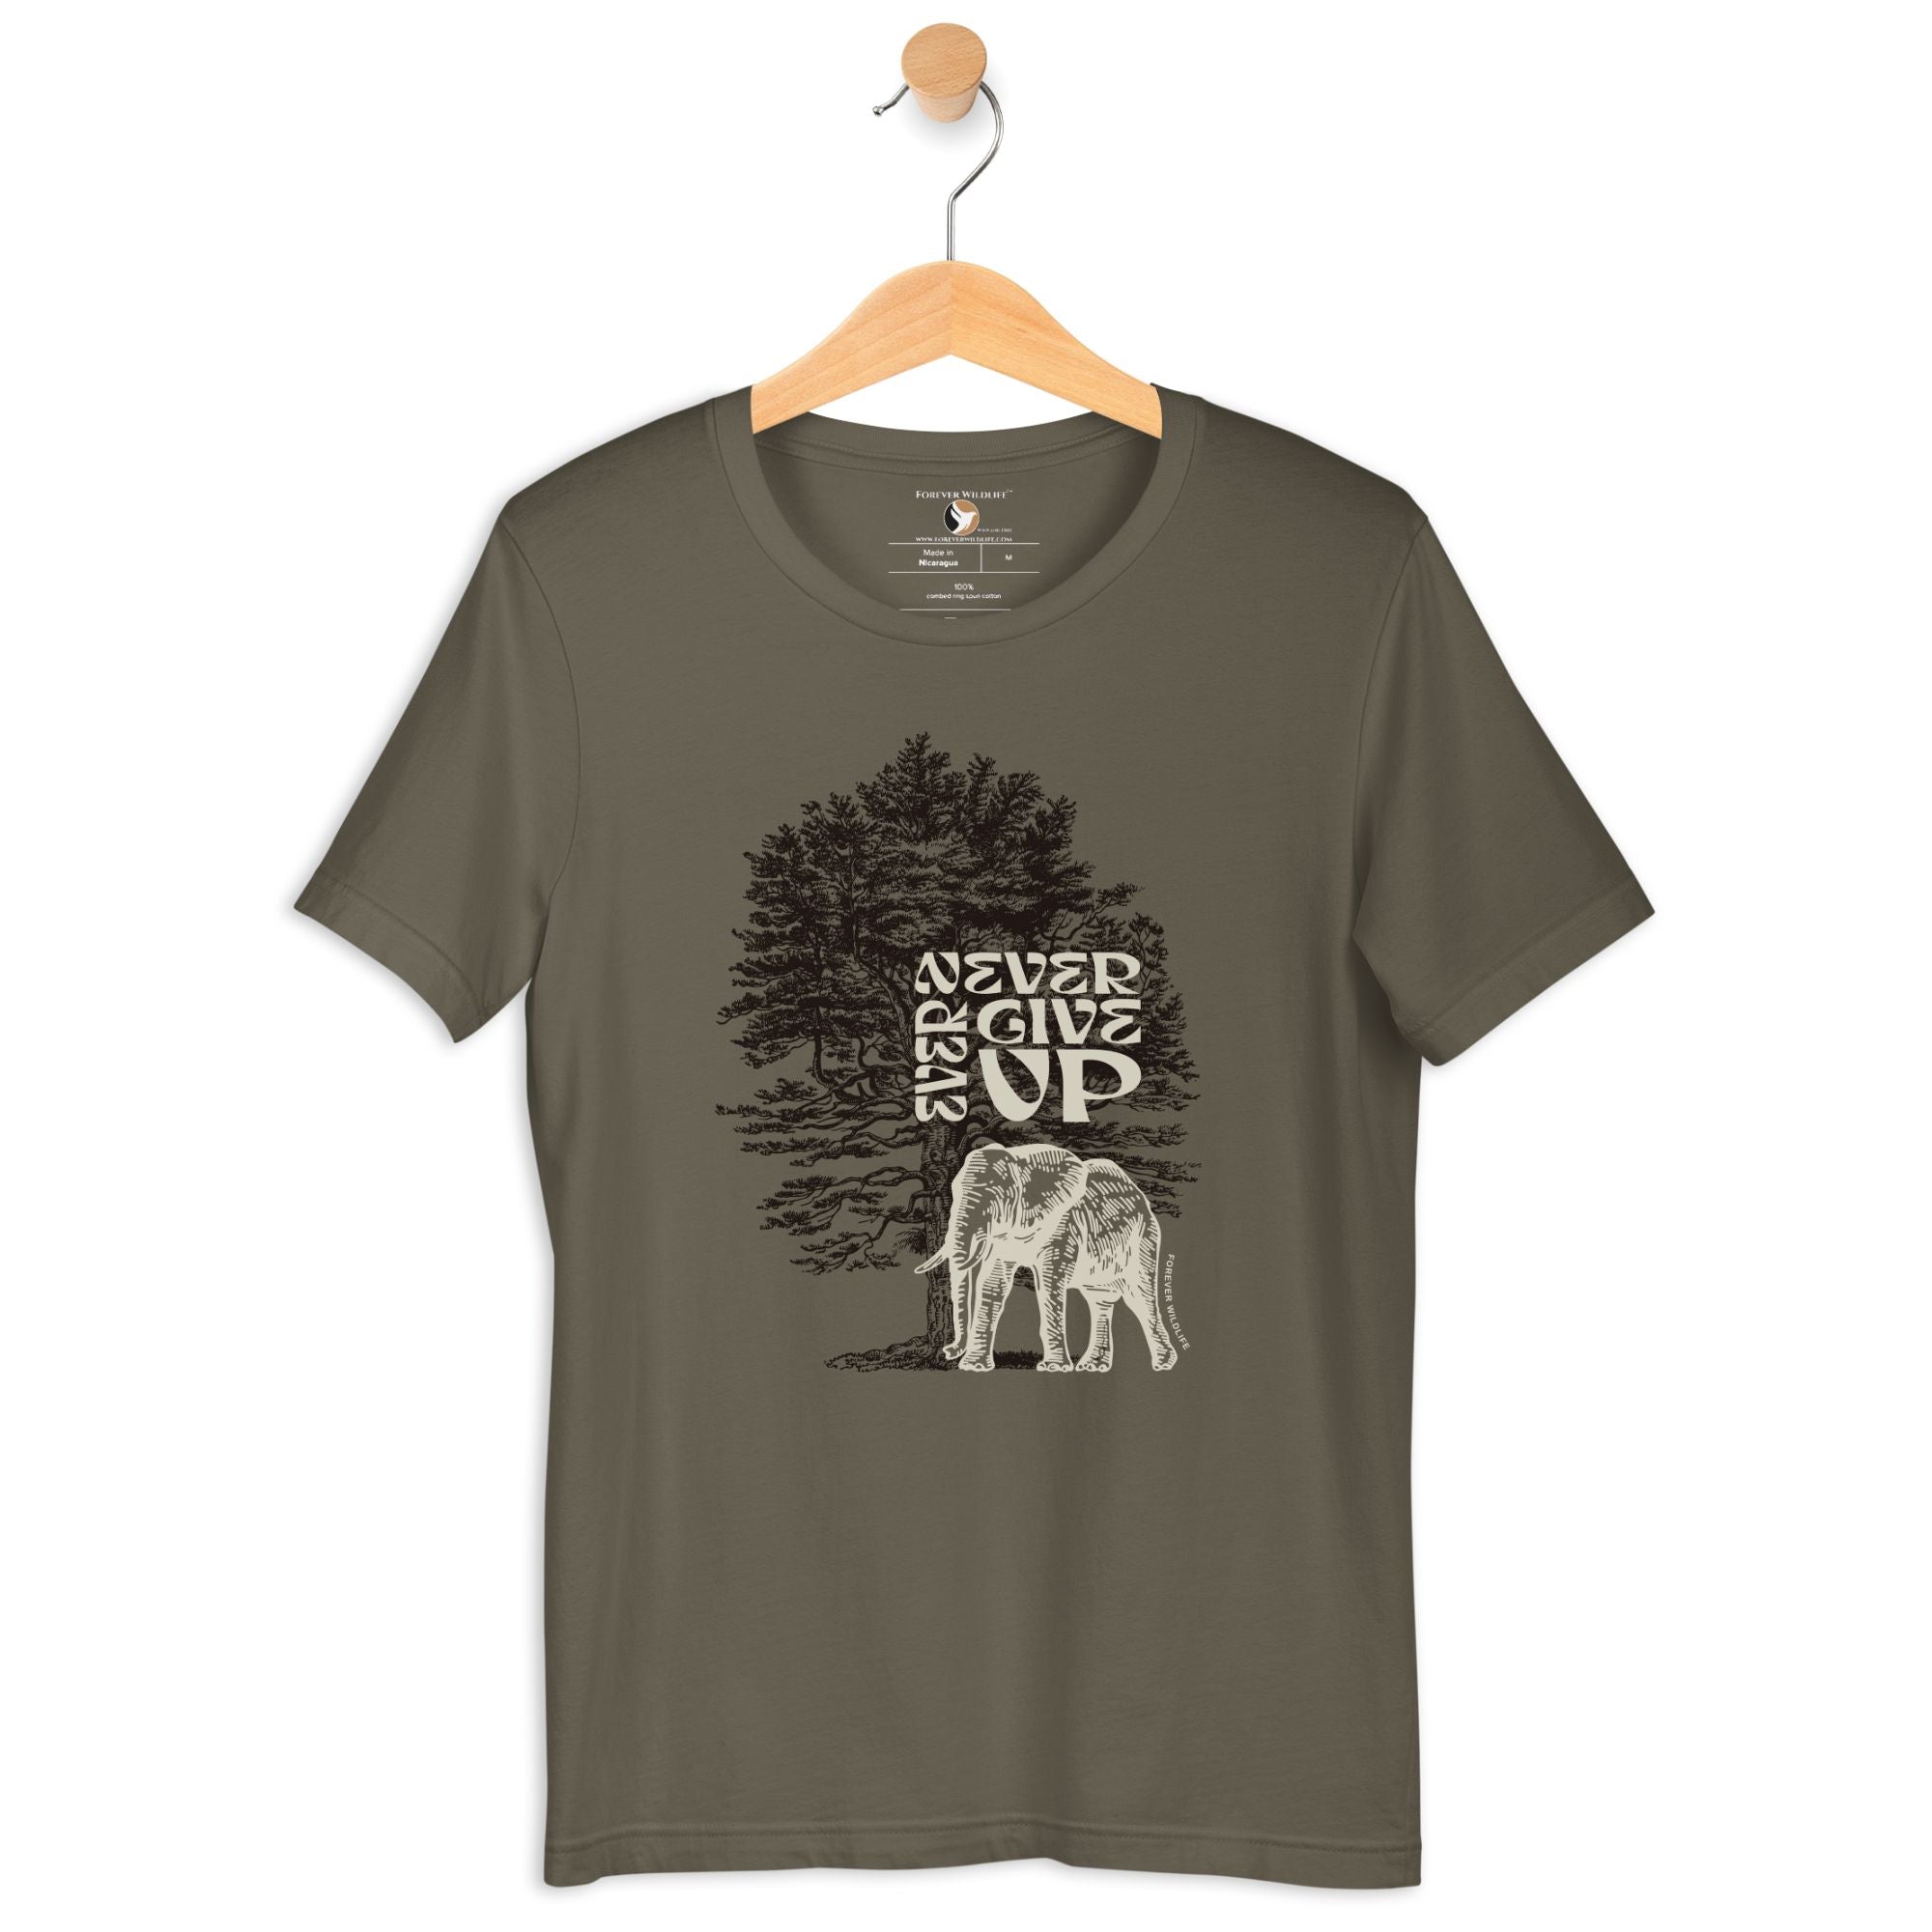 Elephant T-Shirt in Army – Premium Wildlife T-Shirt Design with Never Ever Give Up text, Elephant Shirts & Wildlife Clothing